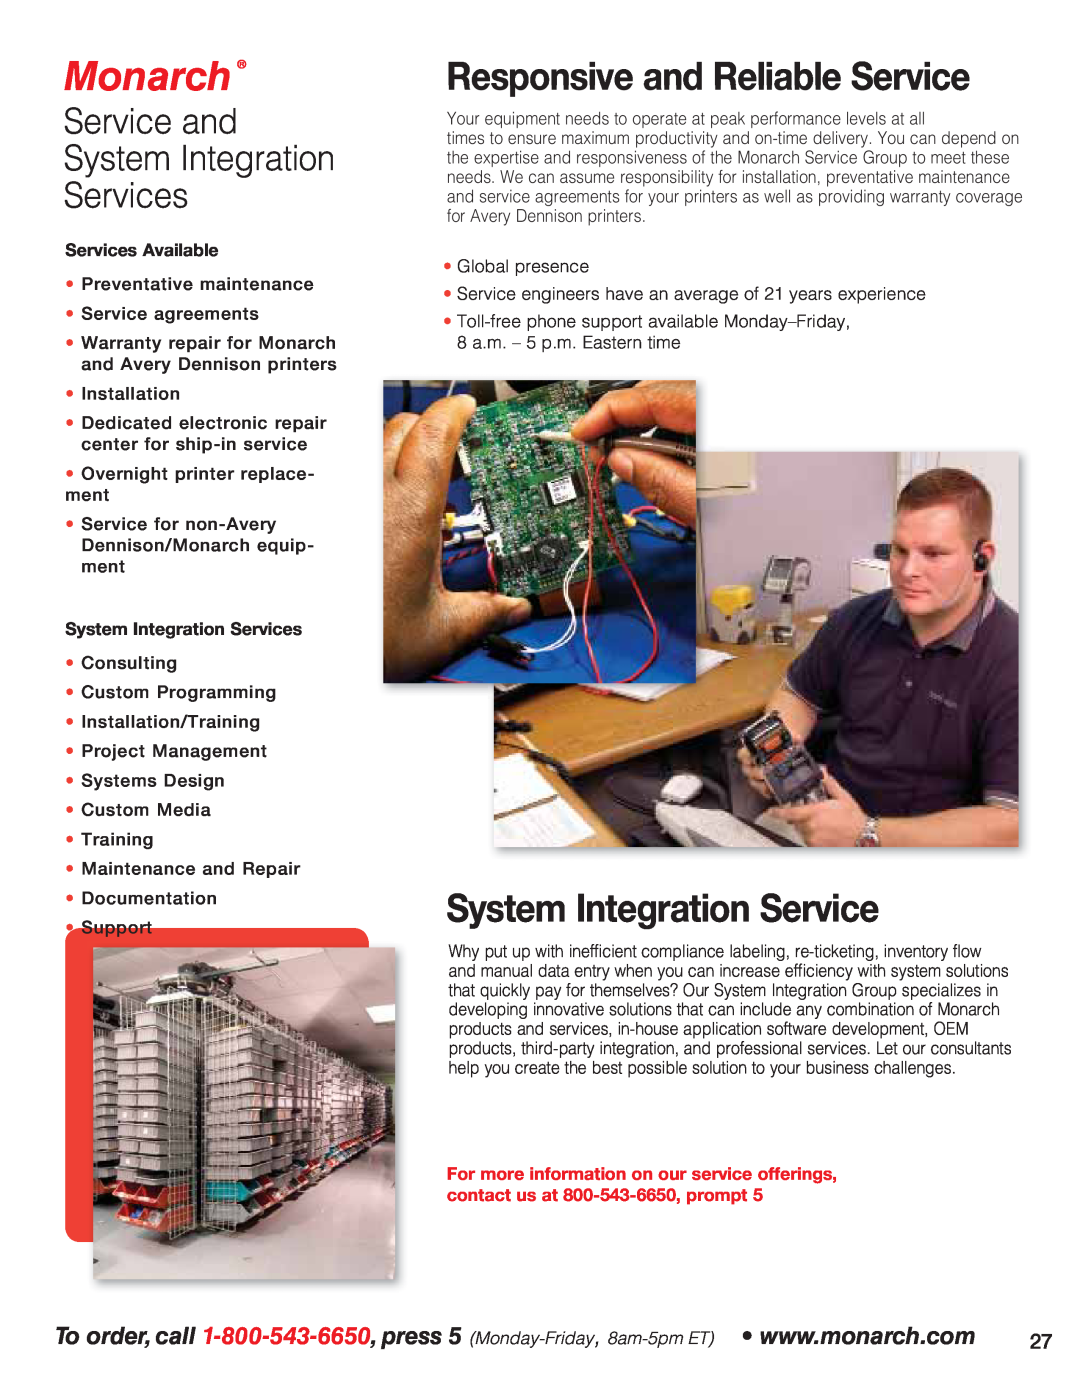 Avery 9864, 9860 Responsive and Reliable Service, Monarch, Service and System Integration Services, Services Available 